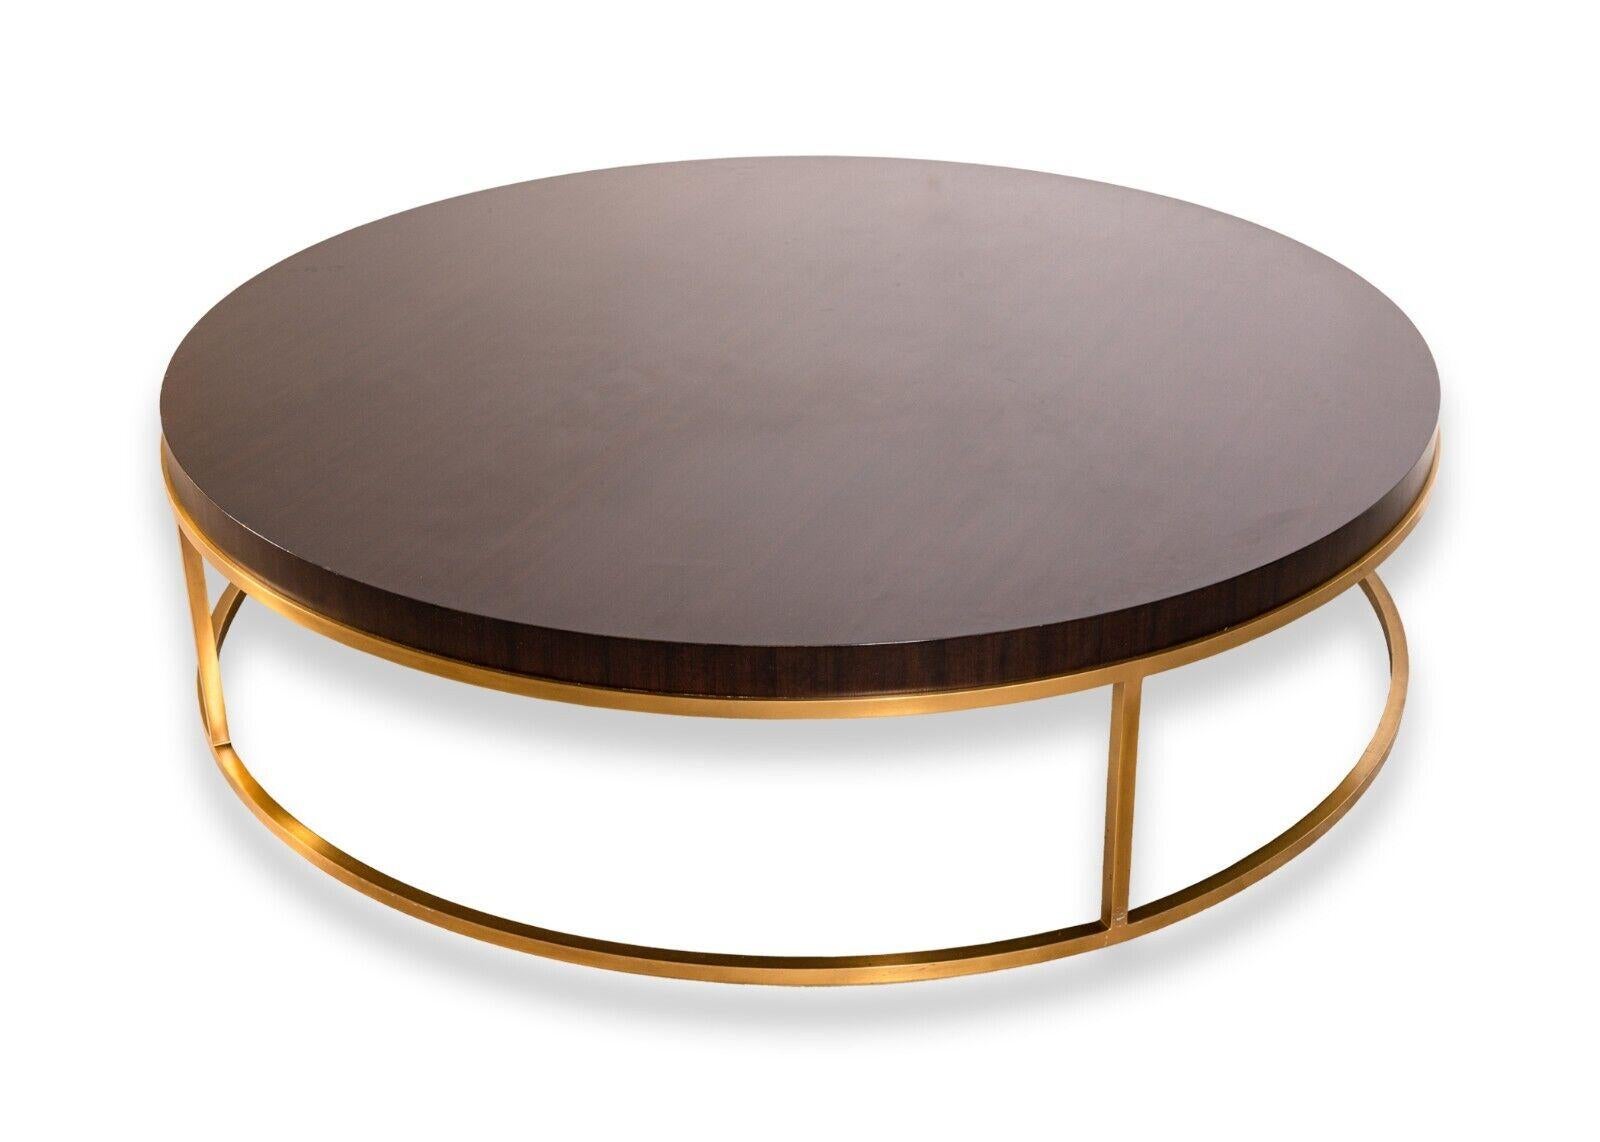 A large round dark wood and brass coffee table. A lovely modern contemporary coffee table with a big presence. This coffee table from Restoration Hardware features a thick, round dark wood table top with a semi gloss finish, and a wrapped brass